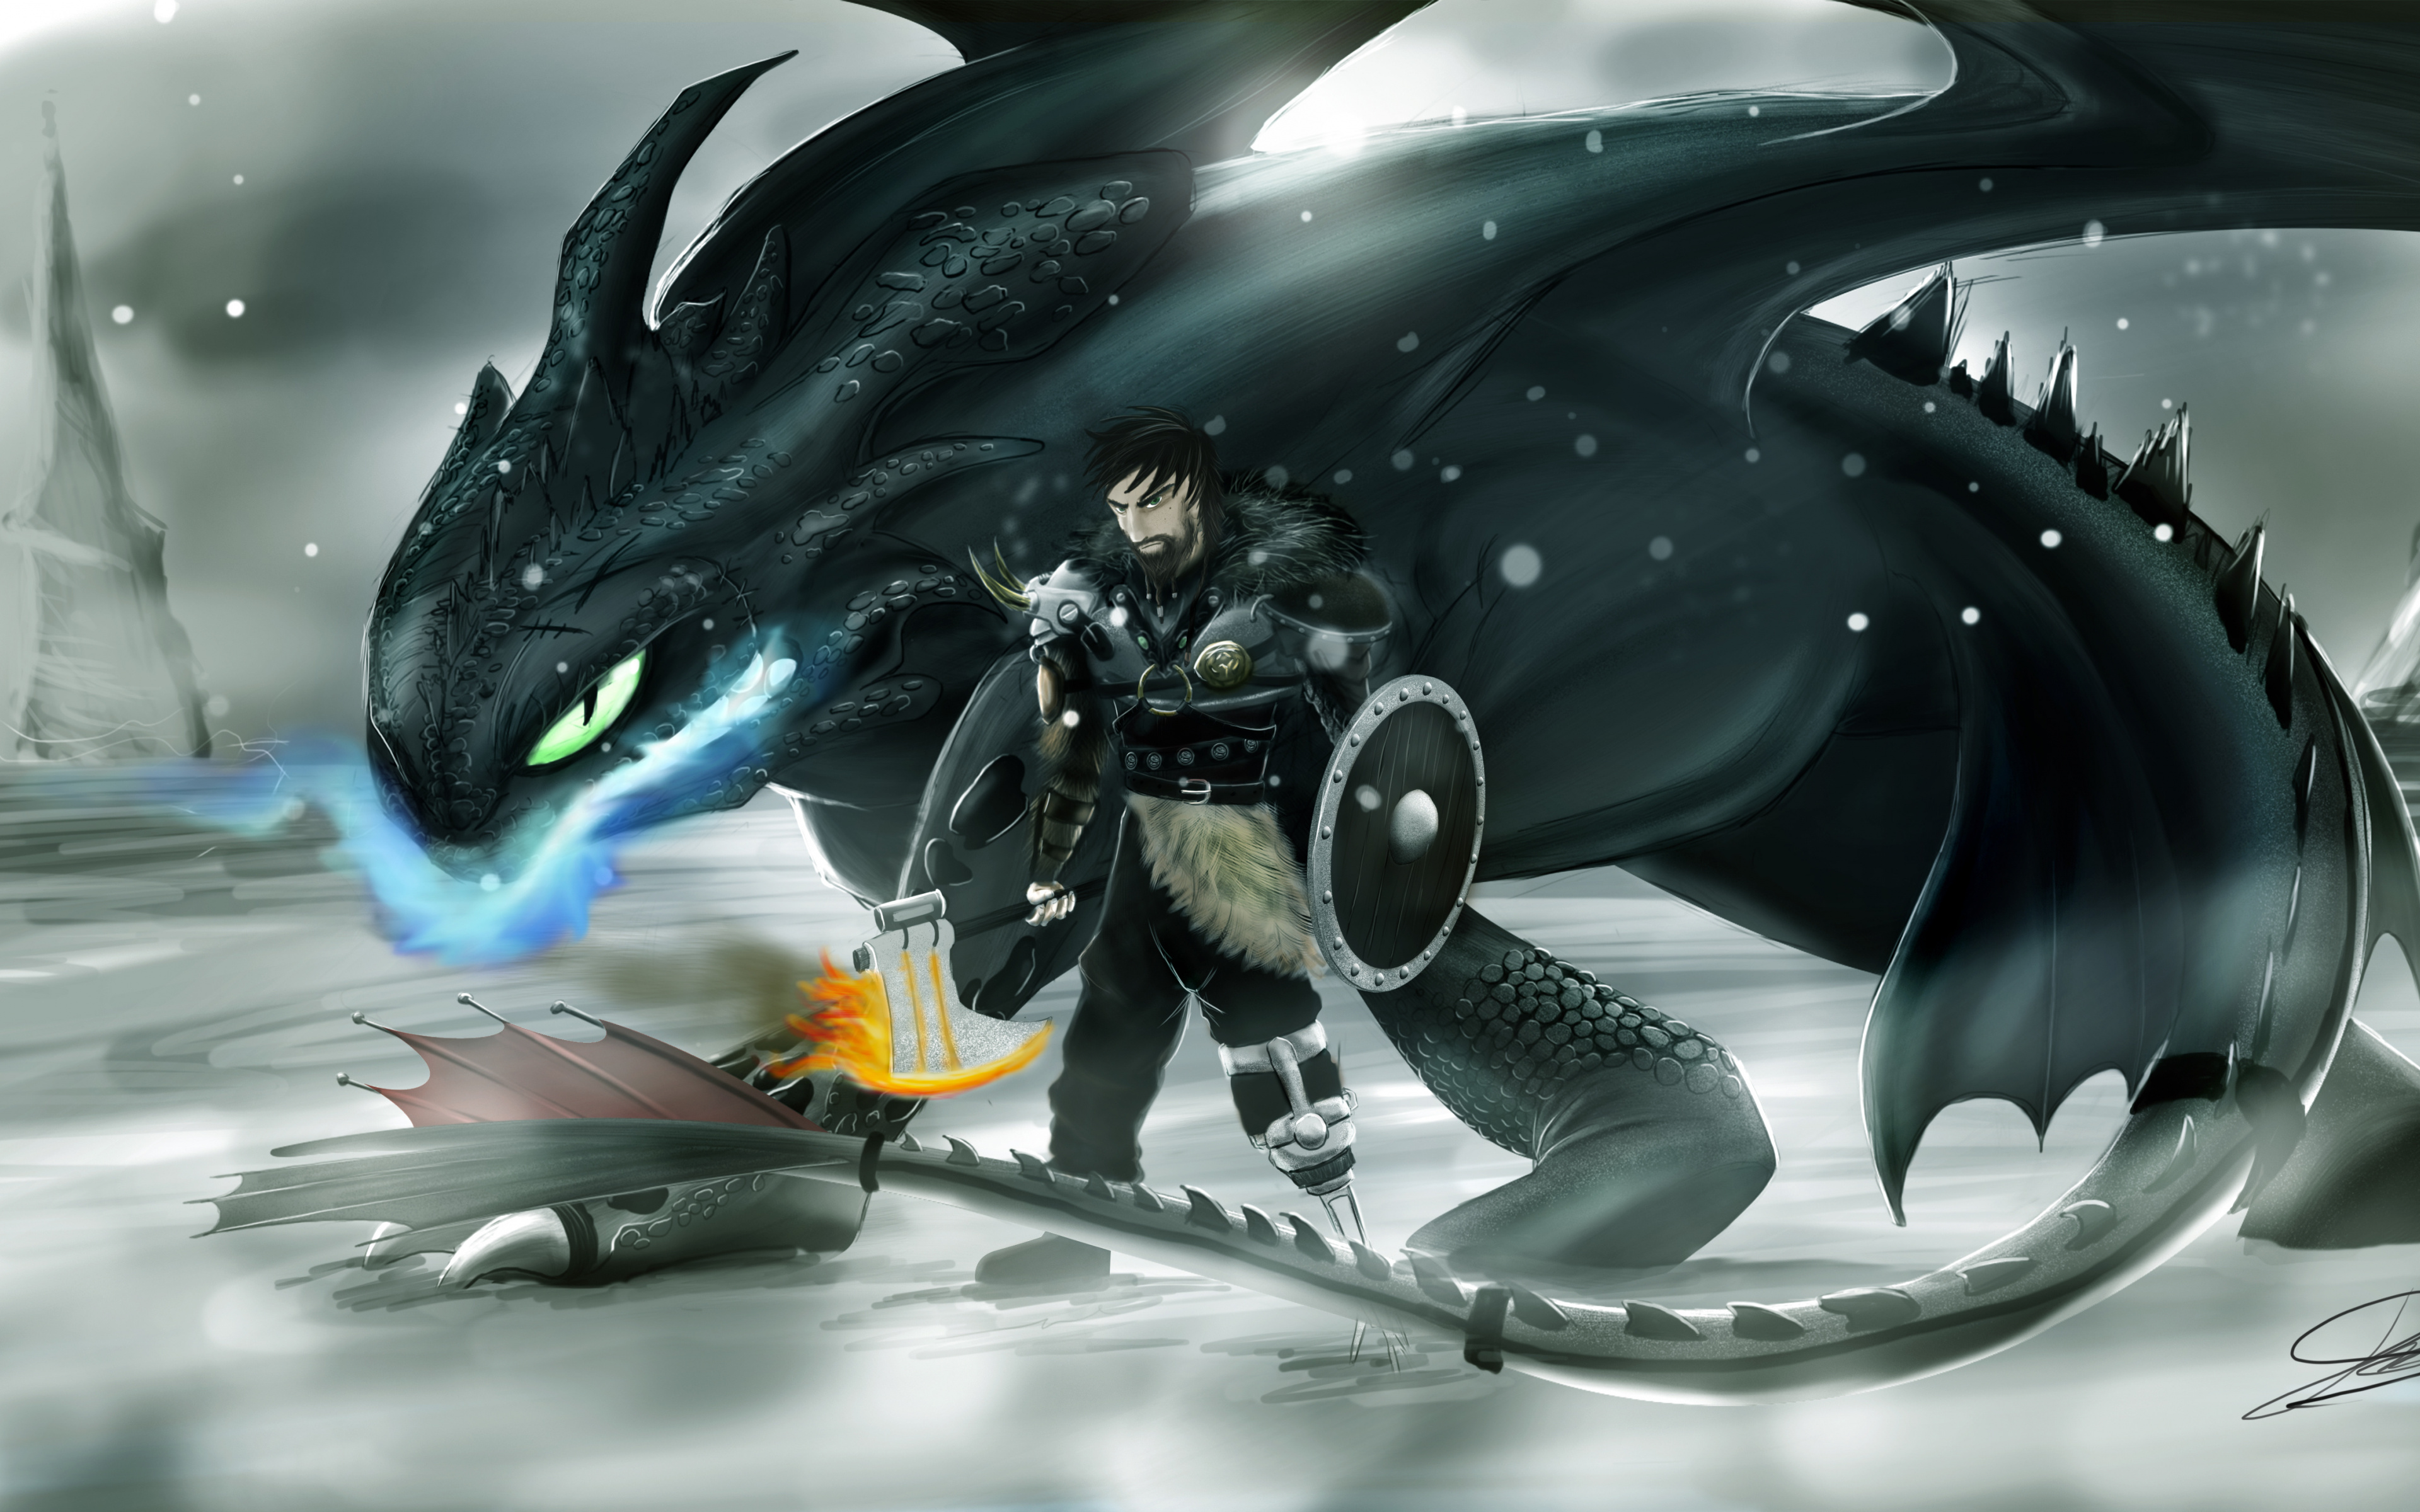 Download 3840x2400 wallpaper dragon, hiccup, how to train